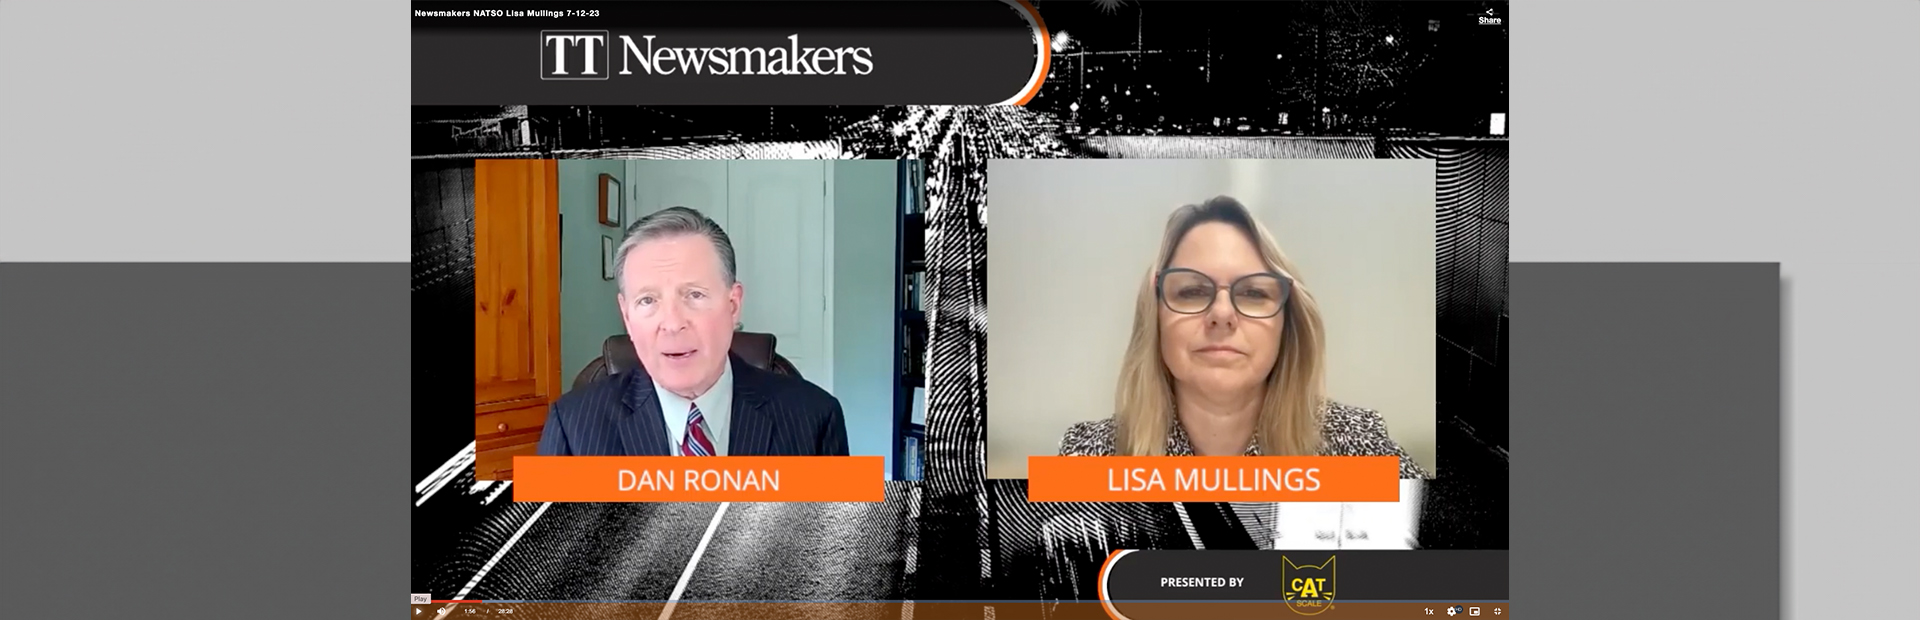 View an appearance on TT Newsmakers by NATSO CEO, Lisa Mullings